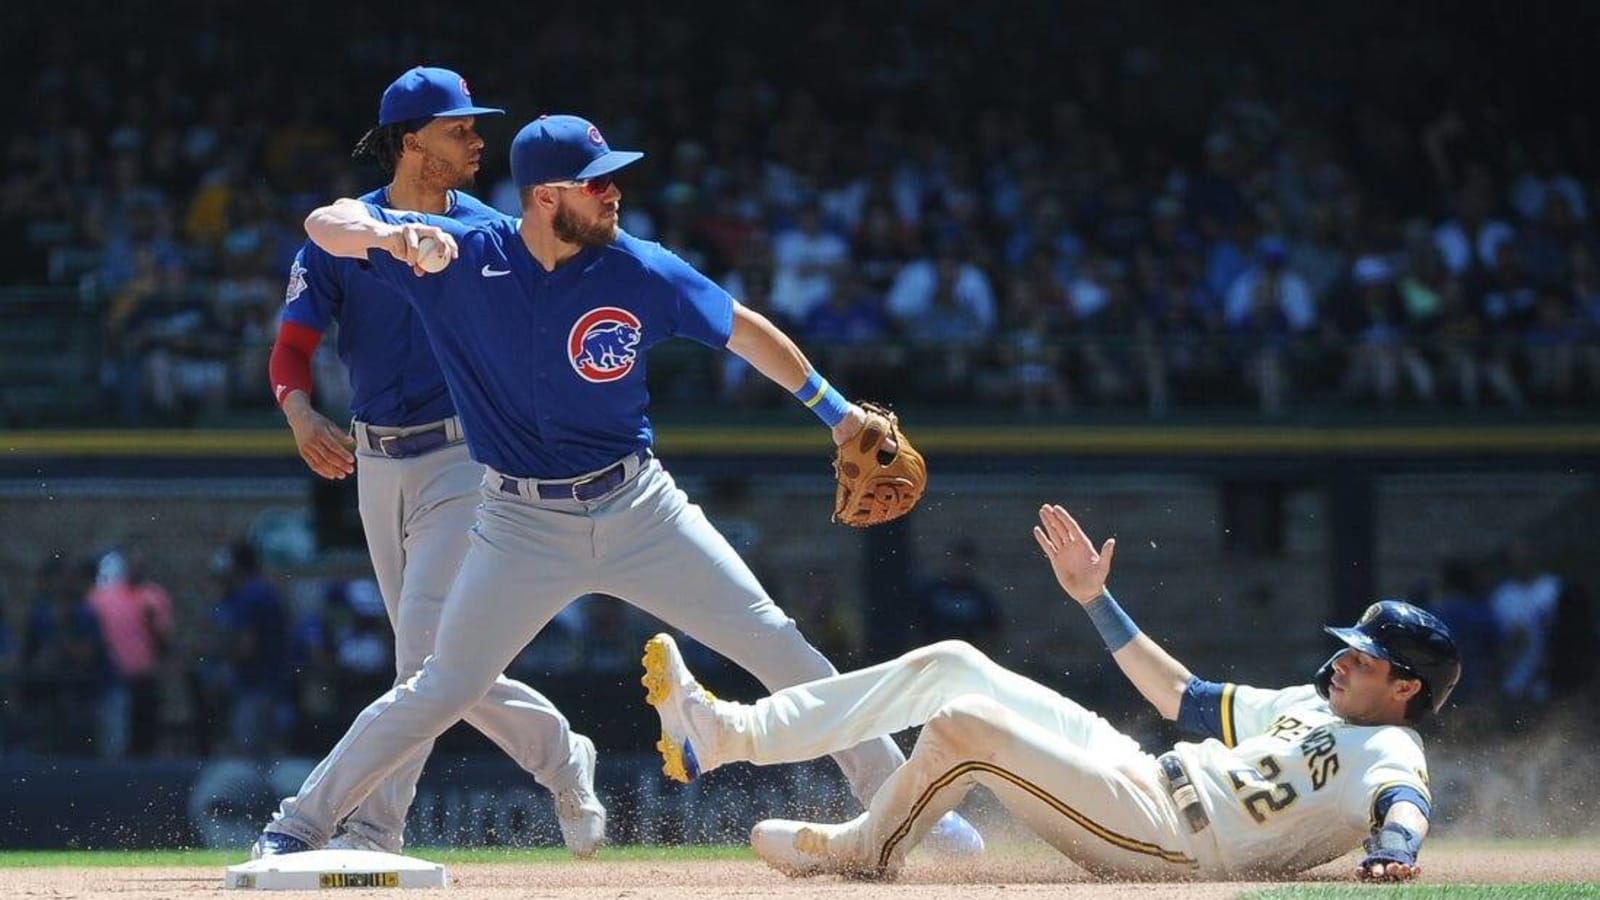 Cubs use late rally to edge Brewers 2-1